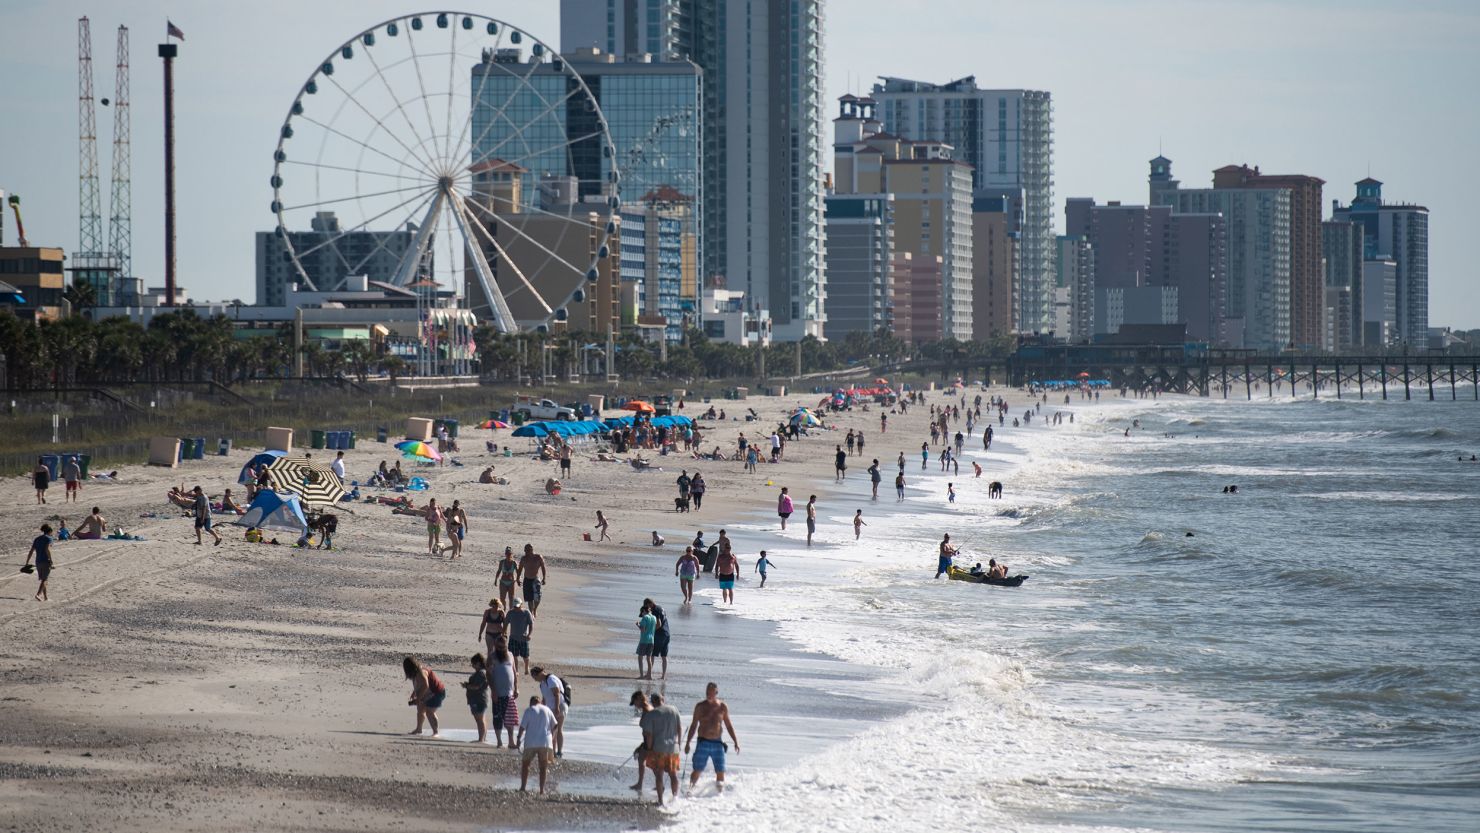 People walk and gather along the beach on the morning of May 23 in Myrtle Beach, South Carolina. 